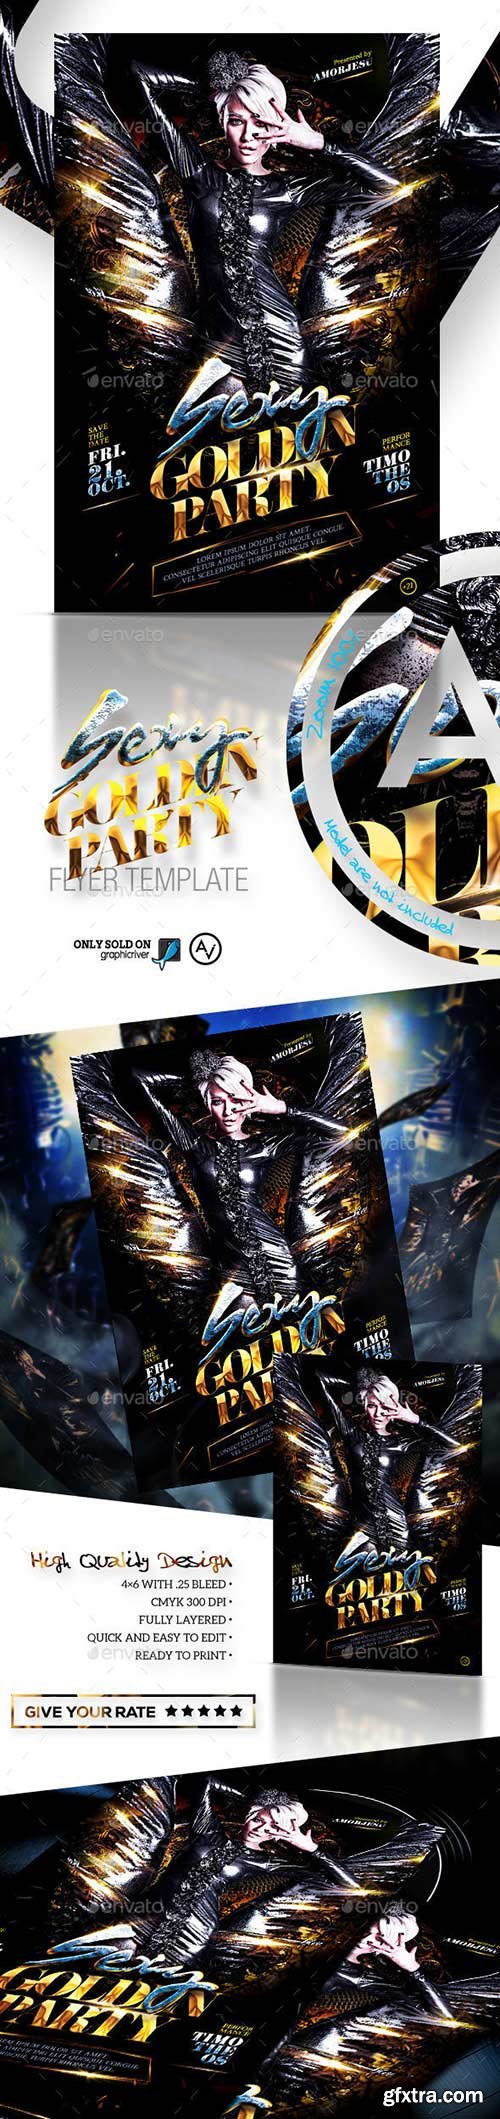 Graphicriver - Sexy Golden Party Flyer Template 11381606